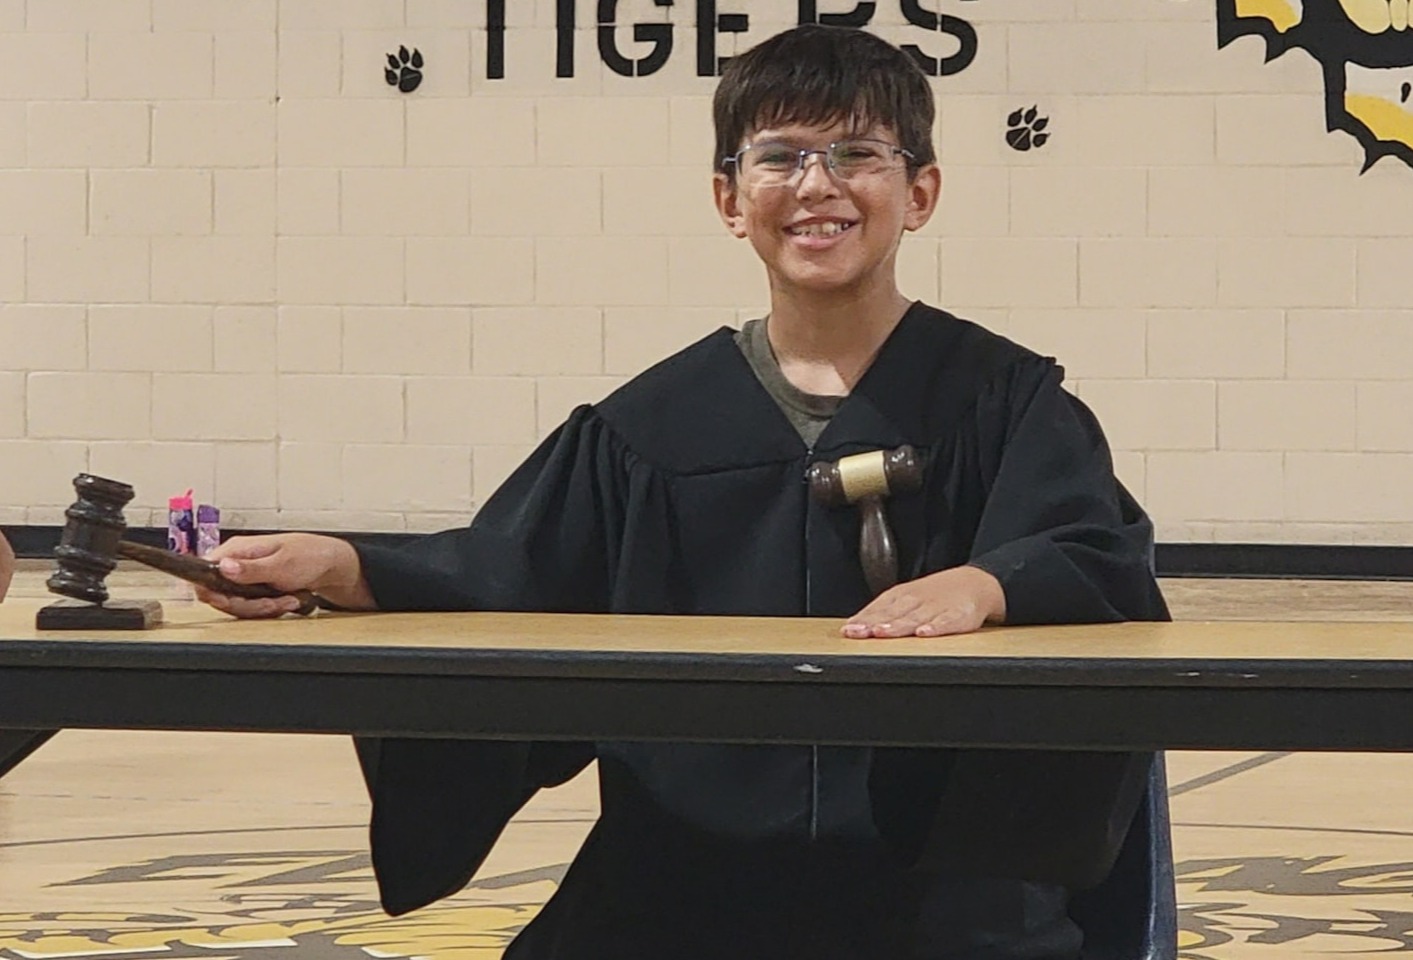 Student wearing the judges robe and holding the gavel.